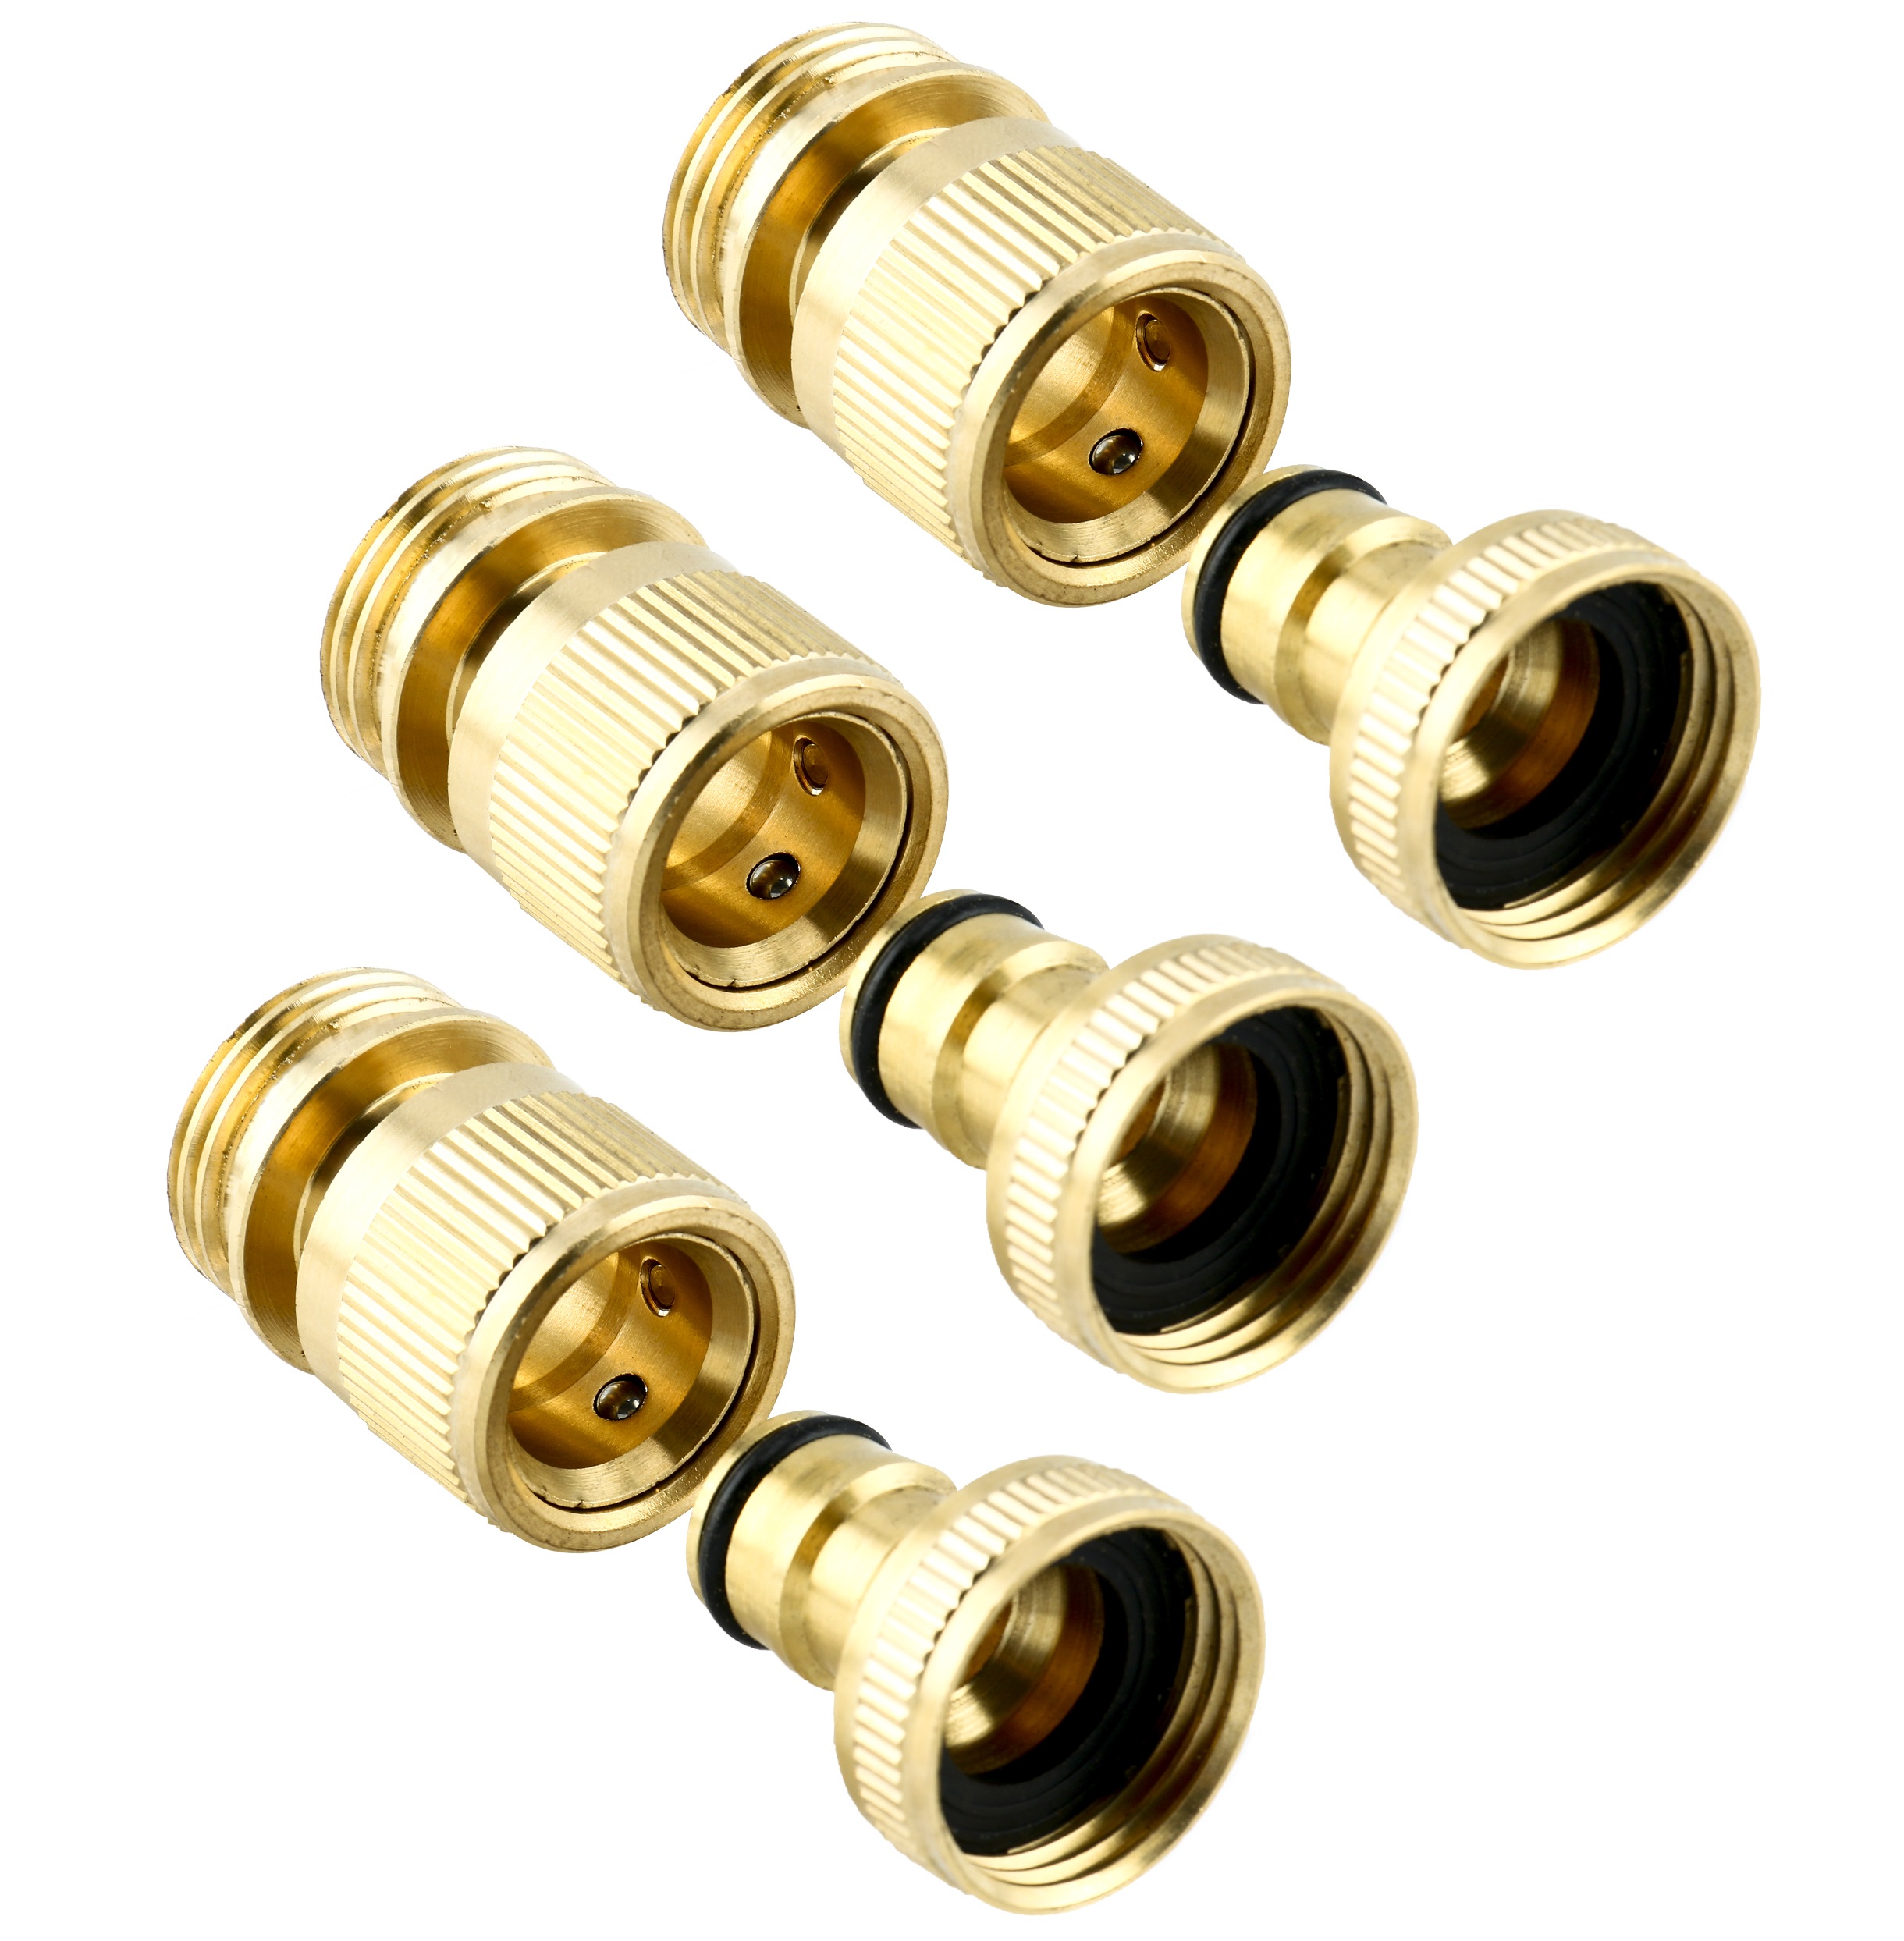 3 Sets Male and Female 3//4/" Garden Hose Quick Connector Brass Connect Fitting